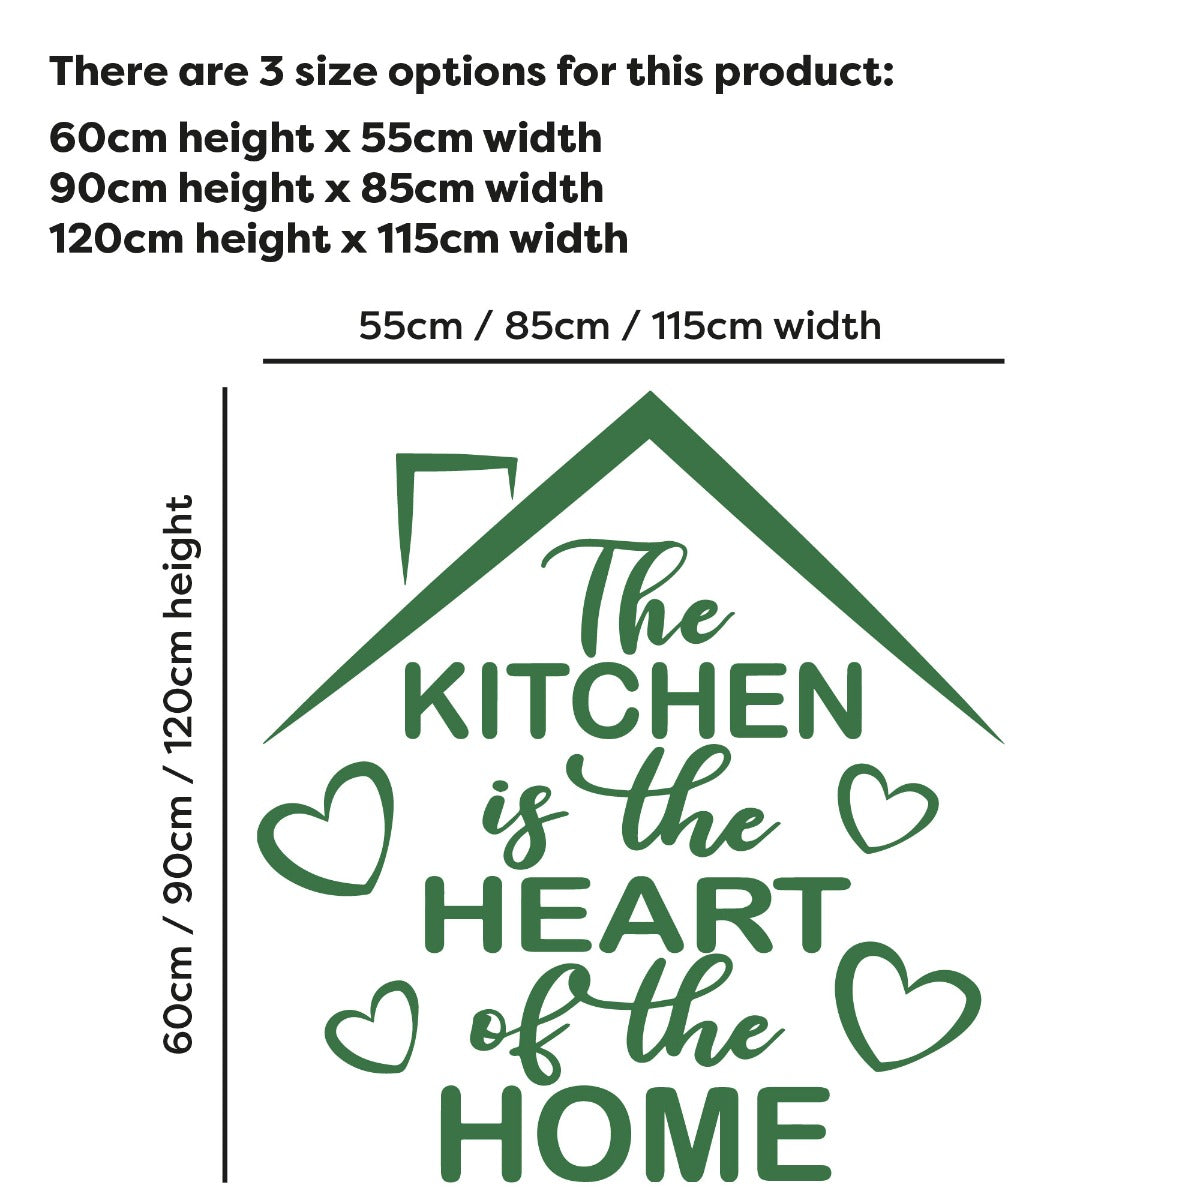 Kitchen Wall Sticker - Roof Heart of the Home